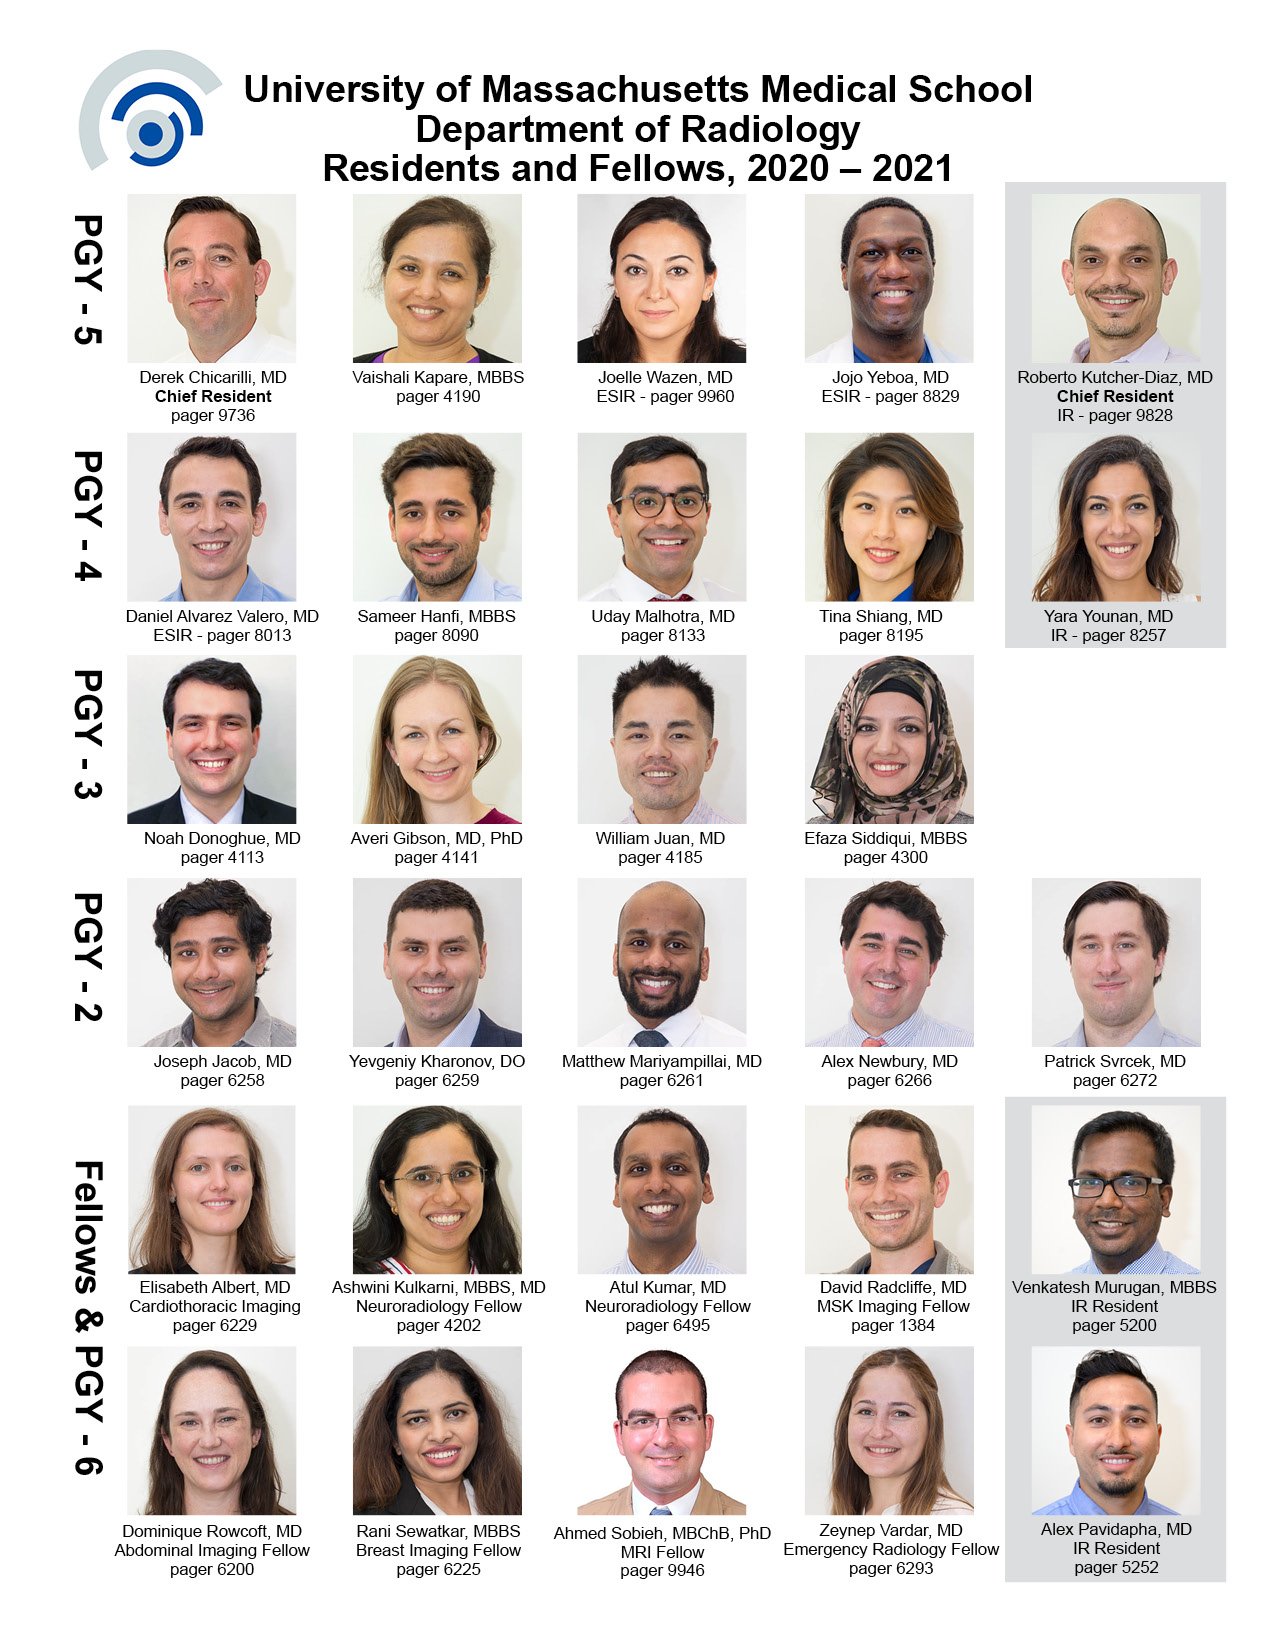 UMMS Radiology Residents and Fellows 2020-2021